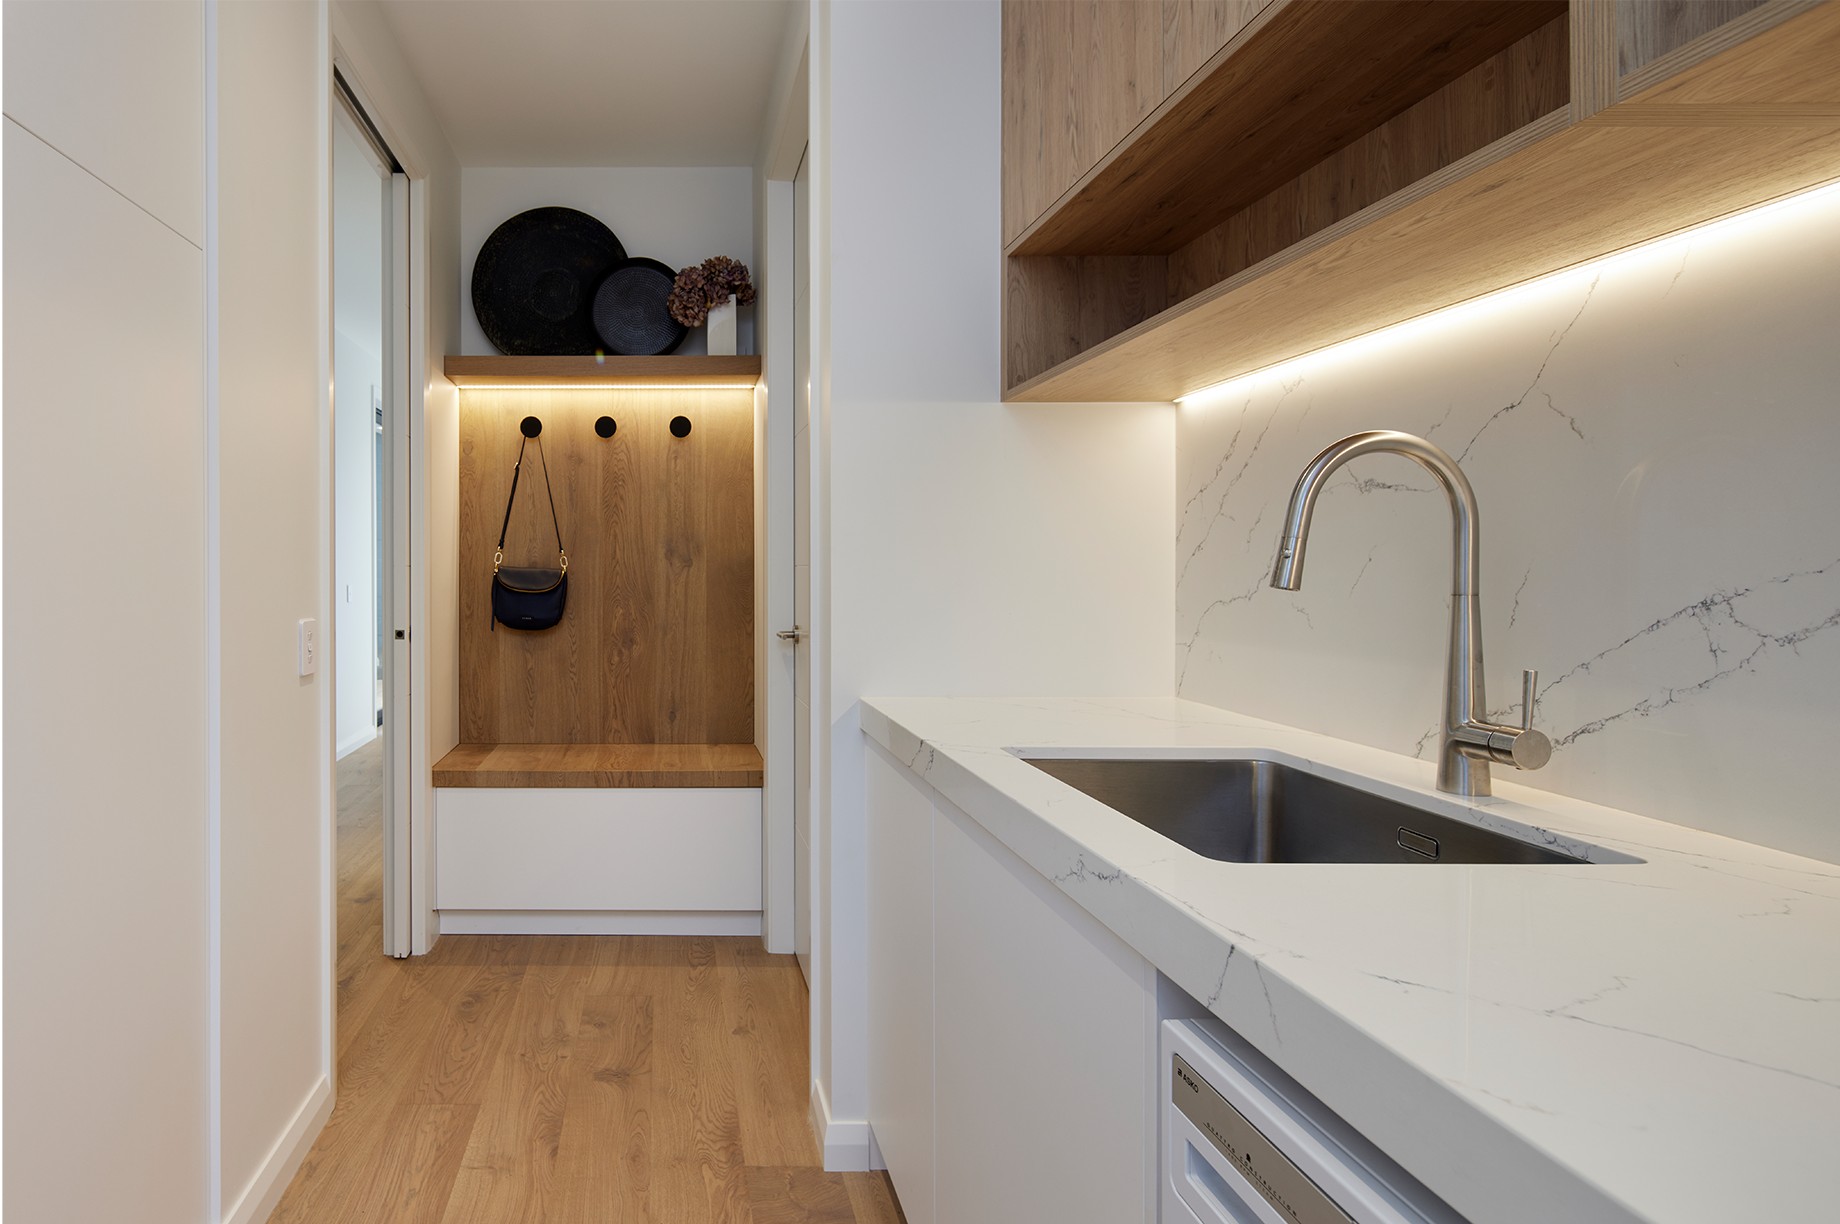 White laundry room interior with built-in cabinet lights